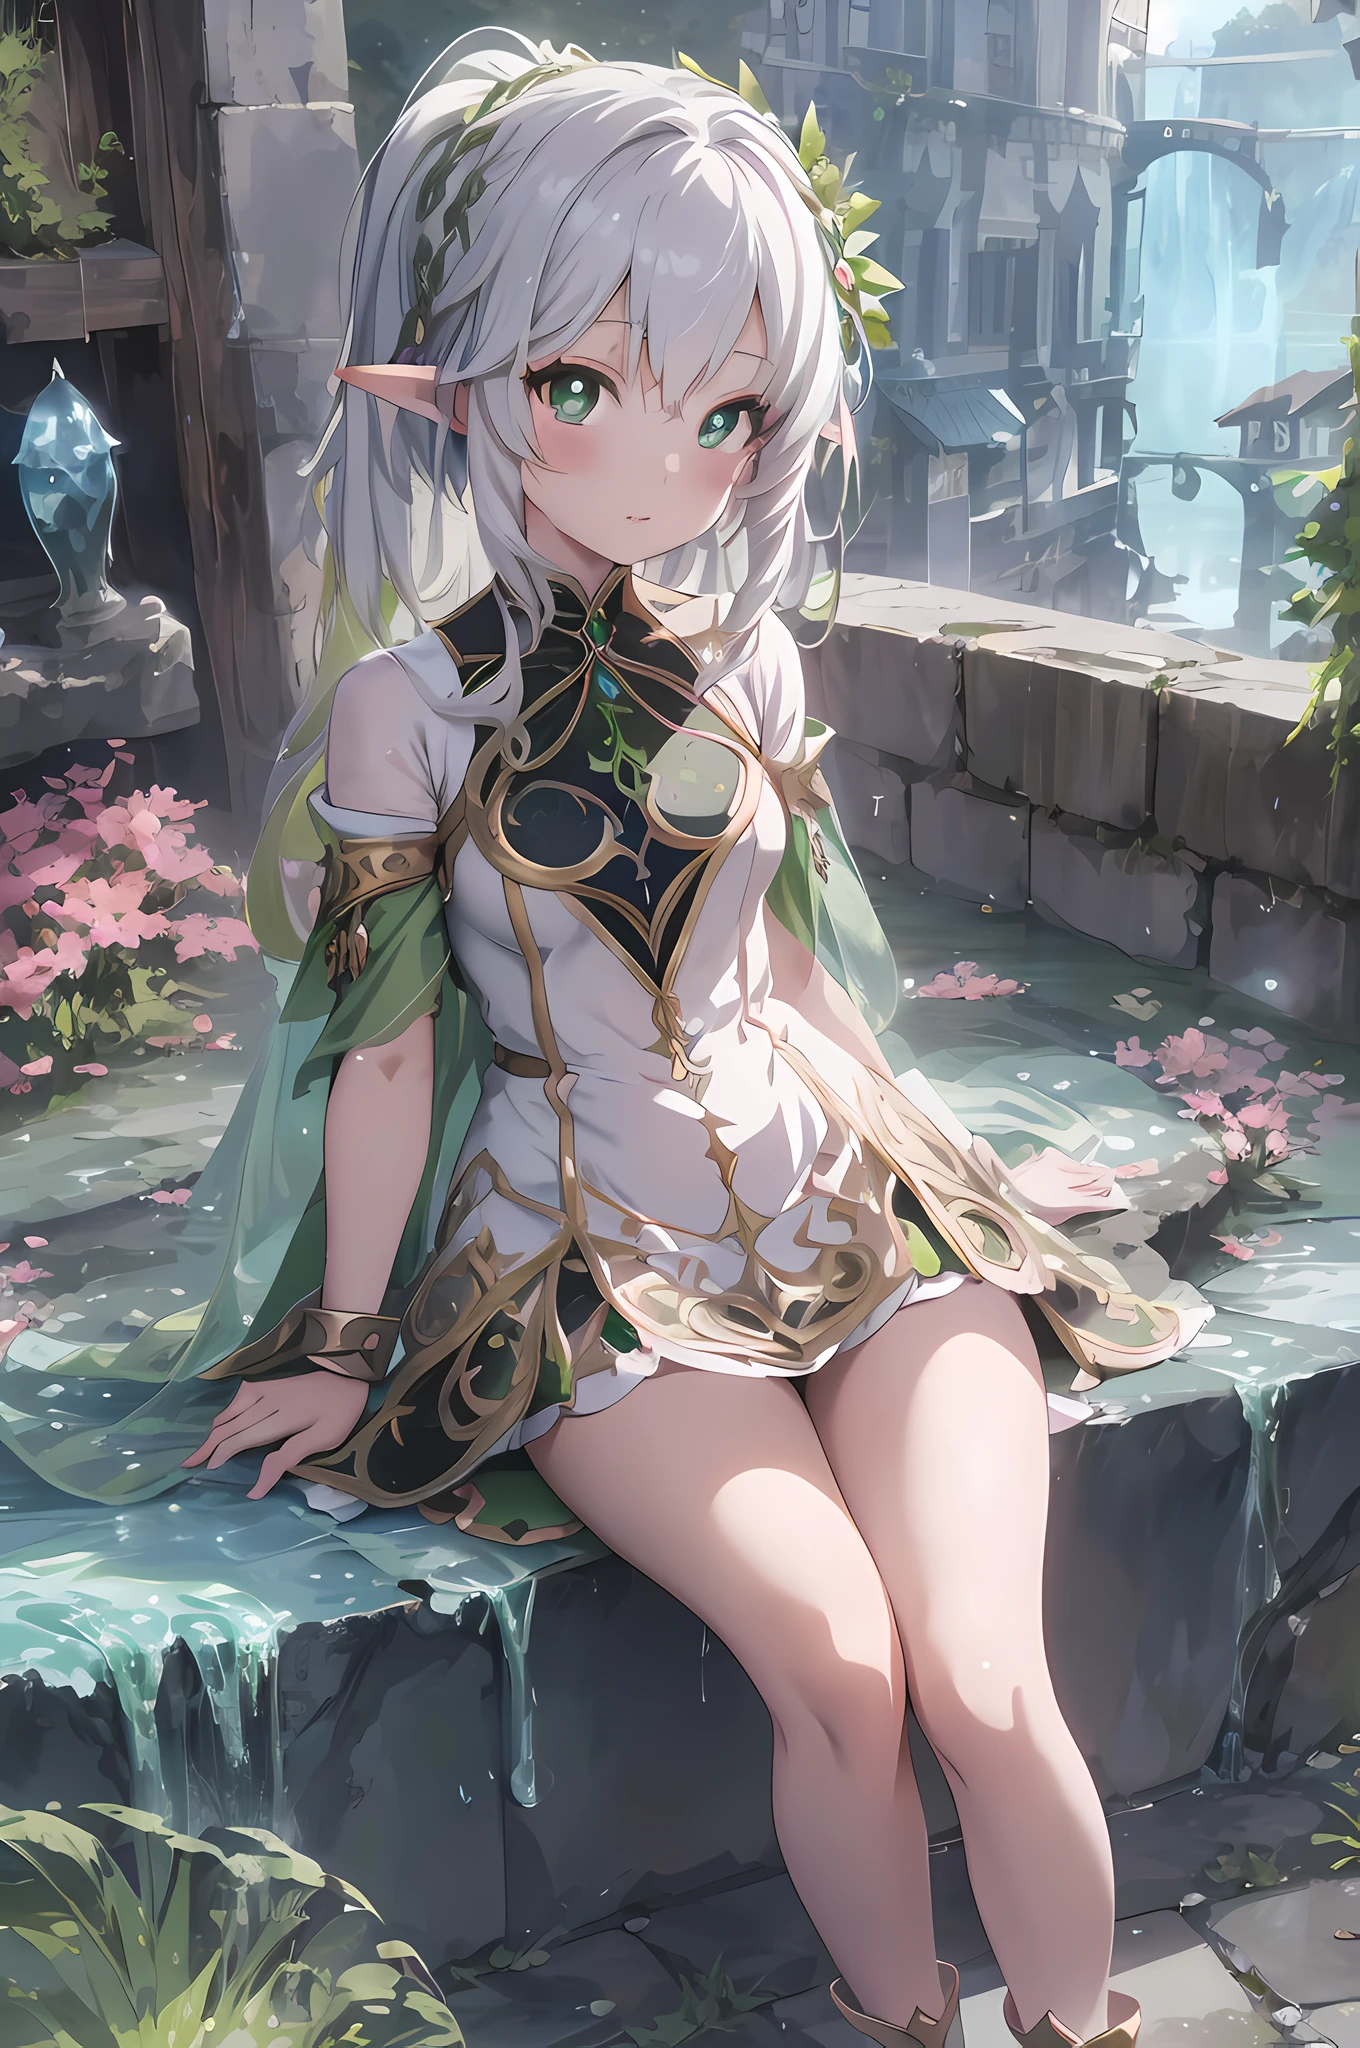 the anime, Images of a woman in a dress, sitting on a stone bench, Elf Girl, Charming elven princess, pixie, cute anime waifu in a nice dress, 8k Graphics High-quality detailed graphics, ((Masterpiece)), Top Quality, accuracy, ((((super detaill))))